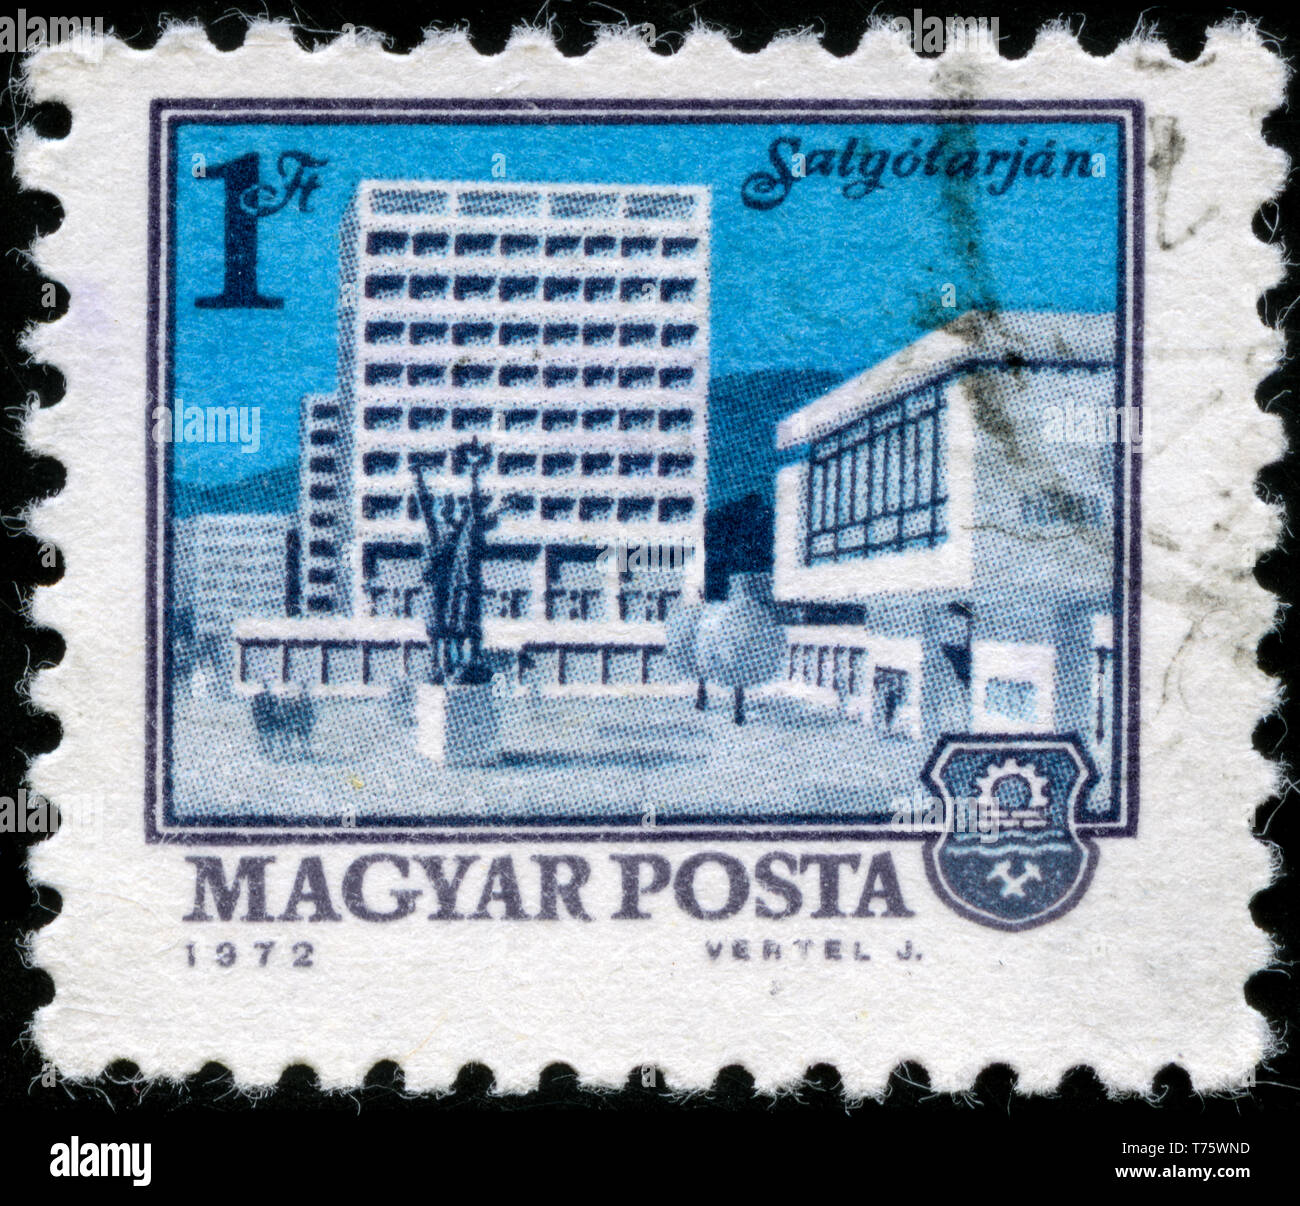 Postage stamp from Hungary in the Cityscapes series issued in 1972 Stock Photo